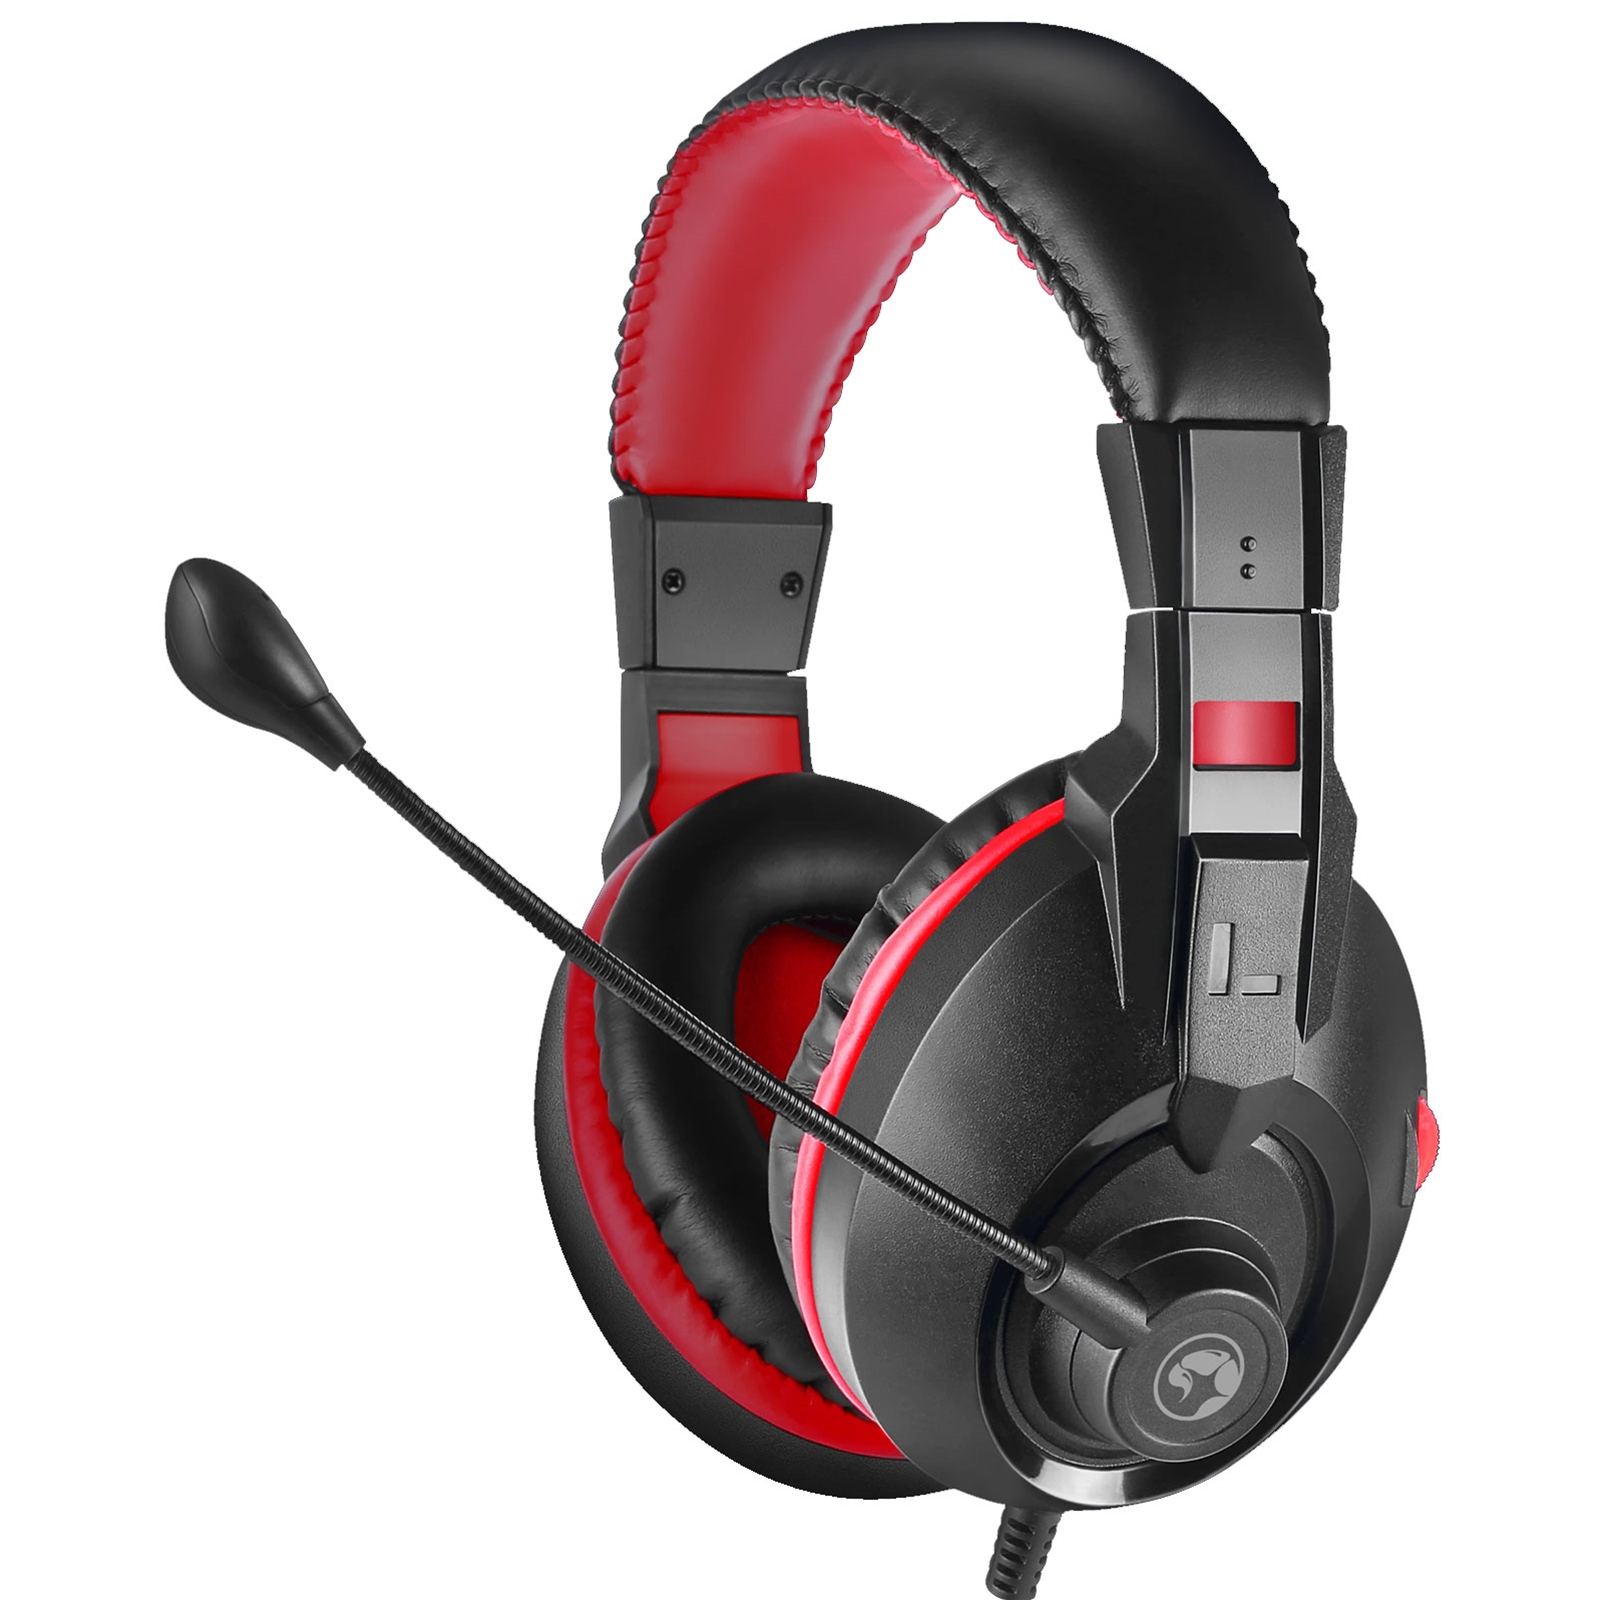 Marvo Scorpion H8321S Gaming Headset, Stereo Sound, Flexible Omnidirectional Microphone